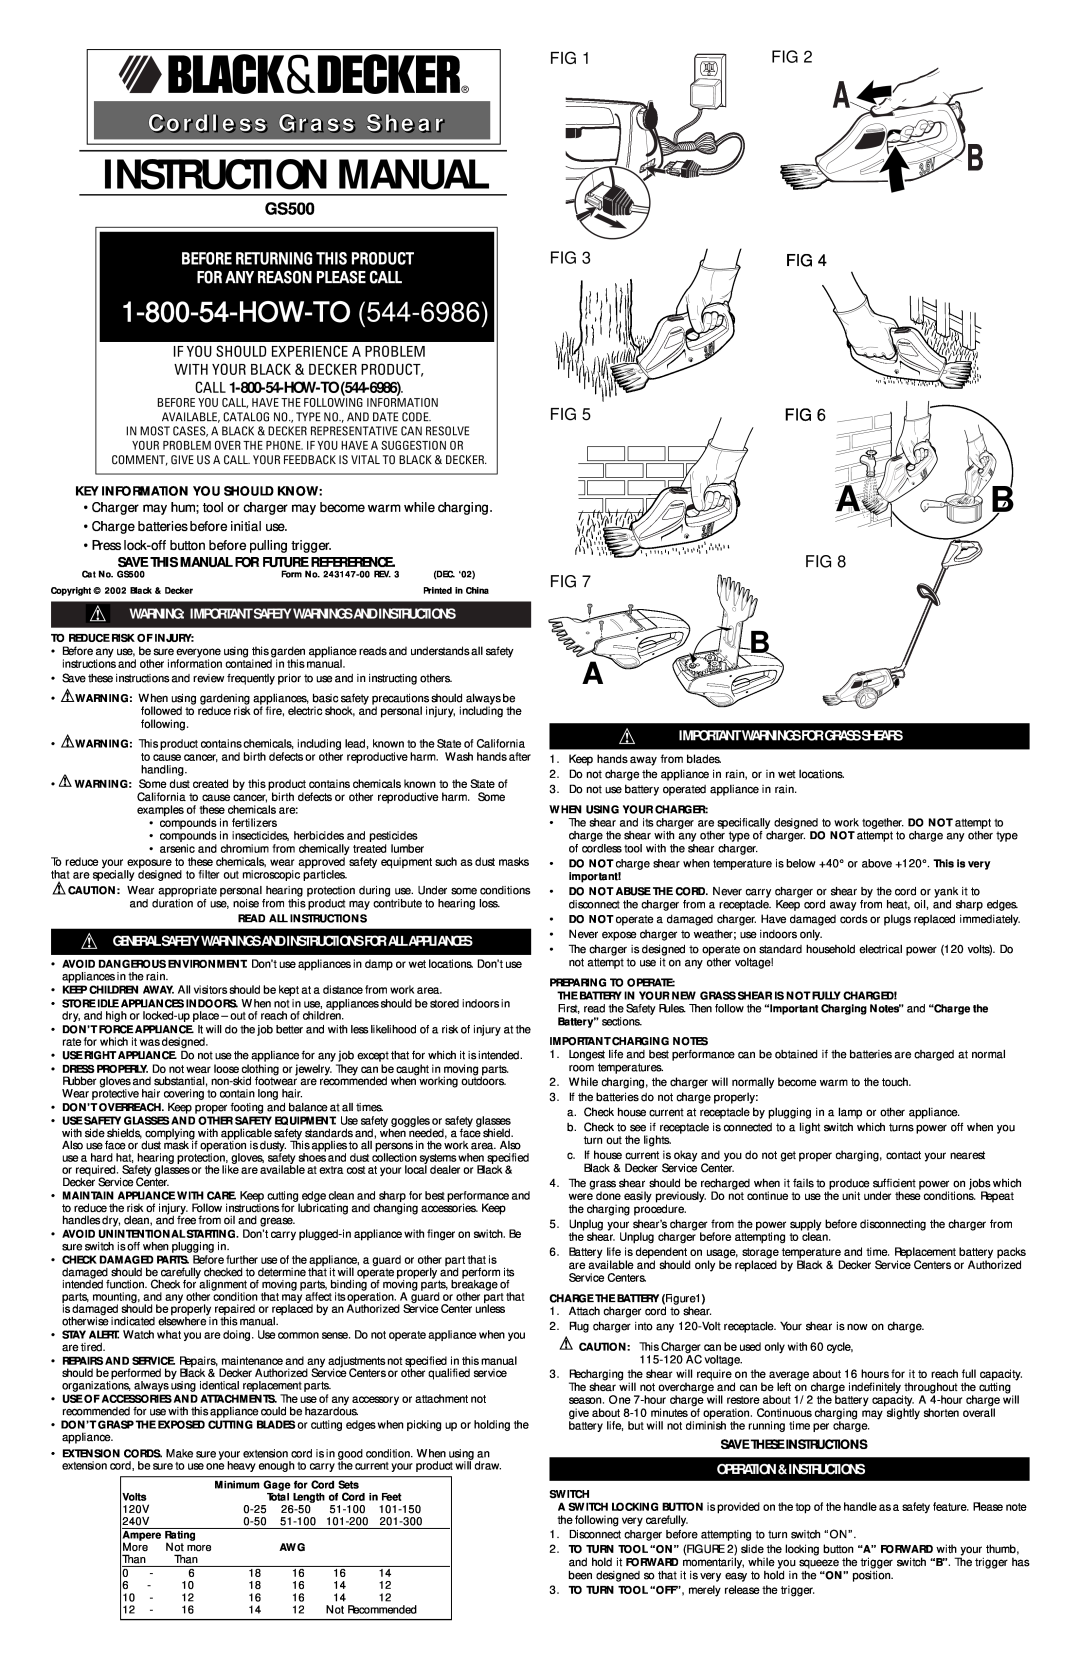 Black & Decker 243147-00 instruction manual Cordless Grass Shear, Key Information You Should Know, Save These Instructions 